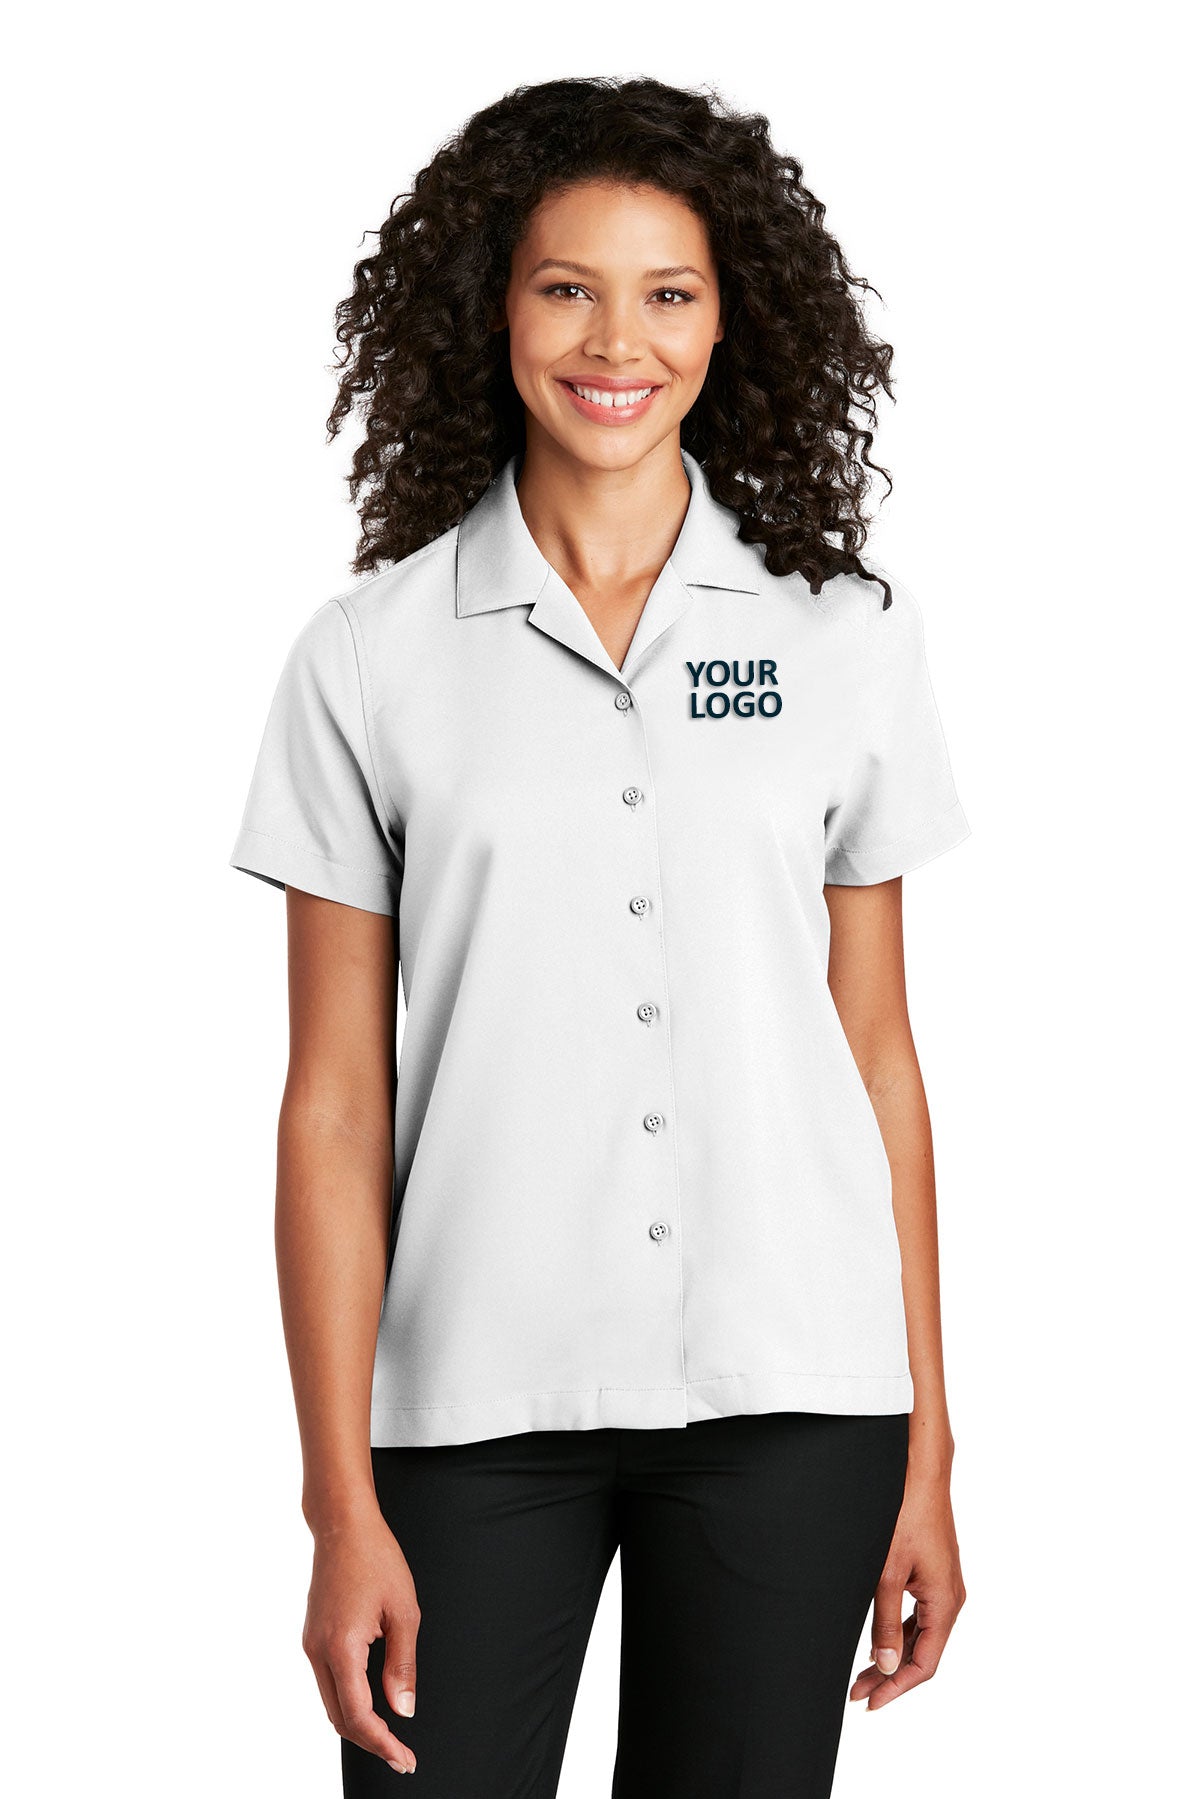 Port Authority White LW400 custom embroidered shirts